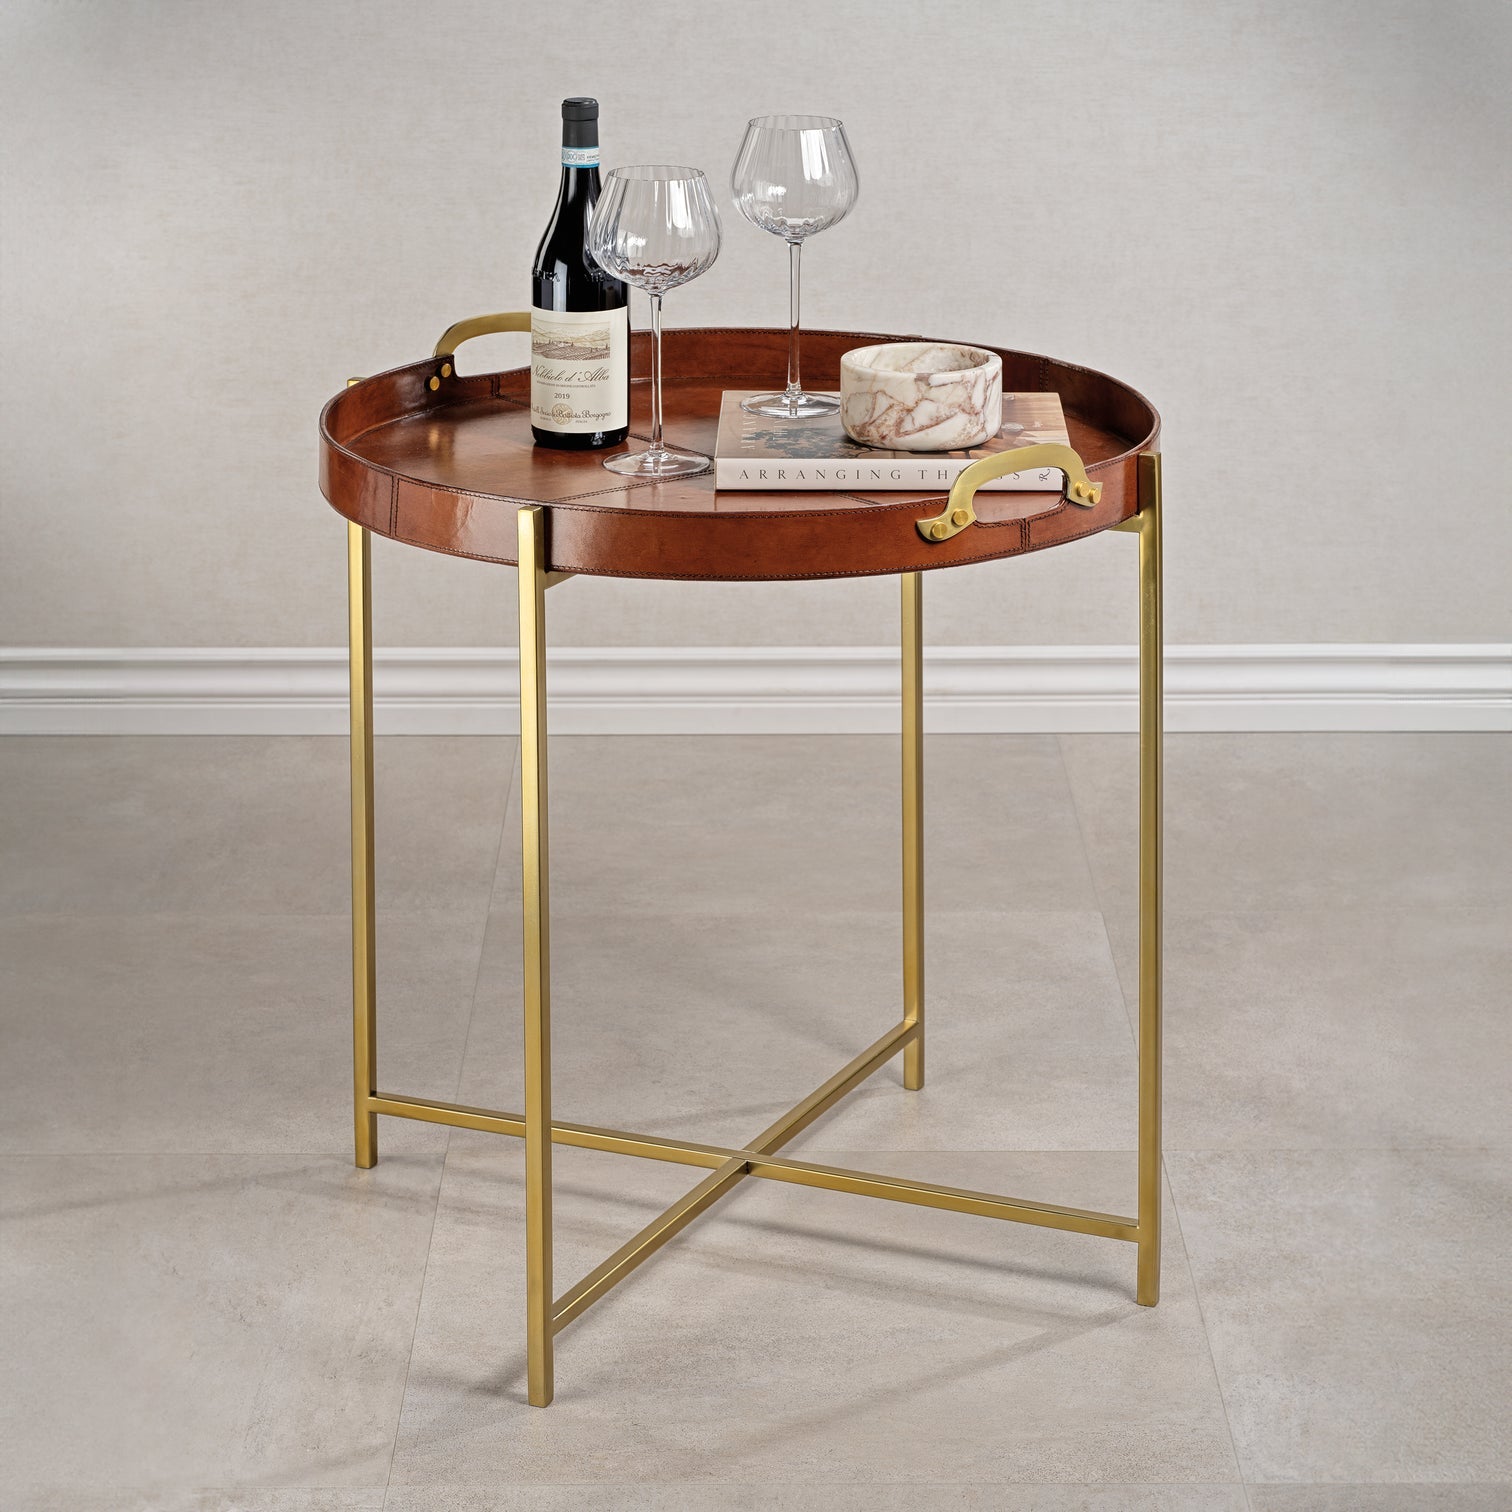 Aspen Leather with Brass Handles Round Tray on Stand